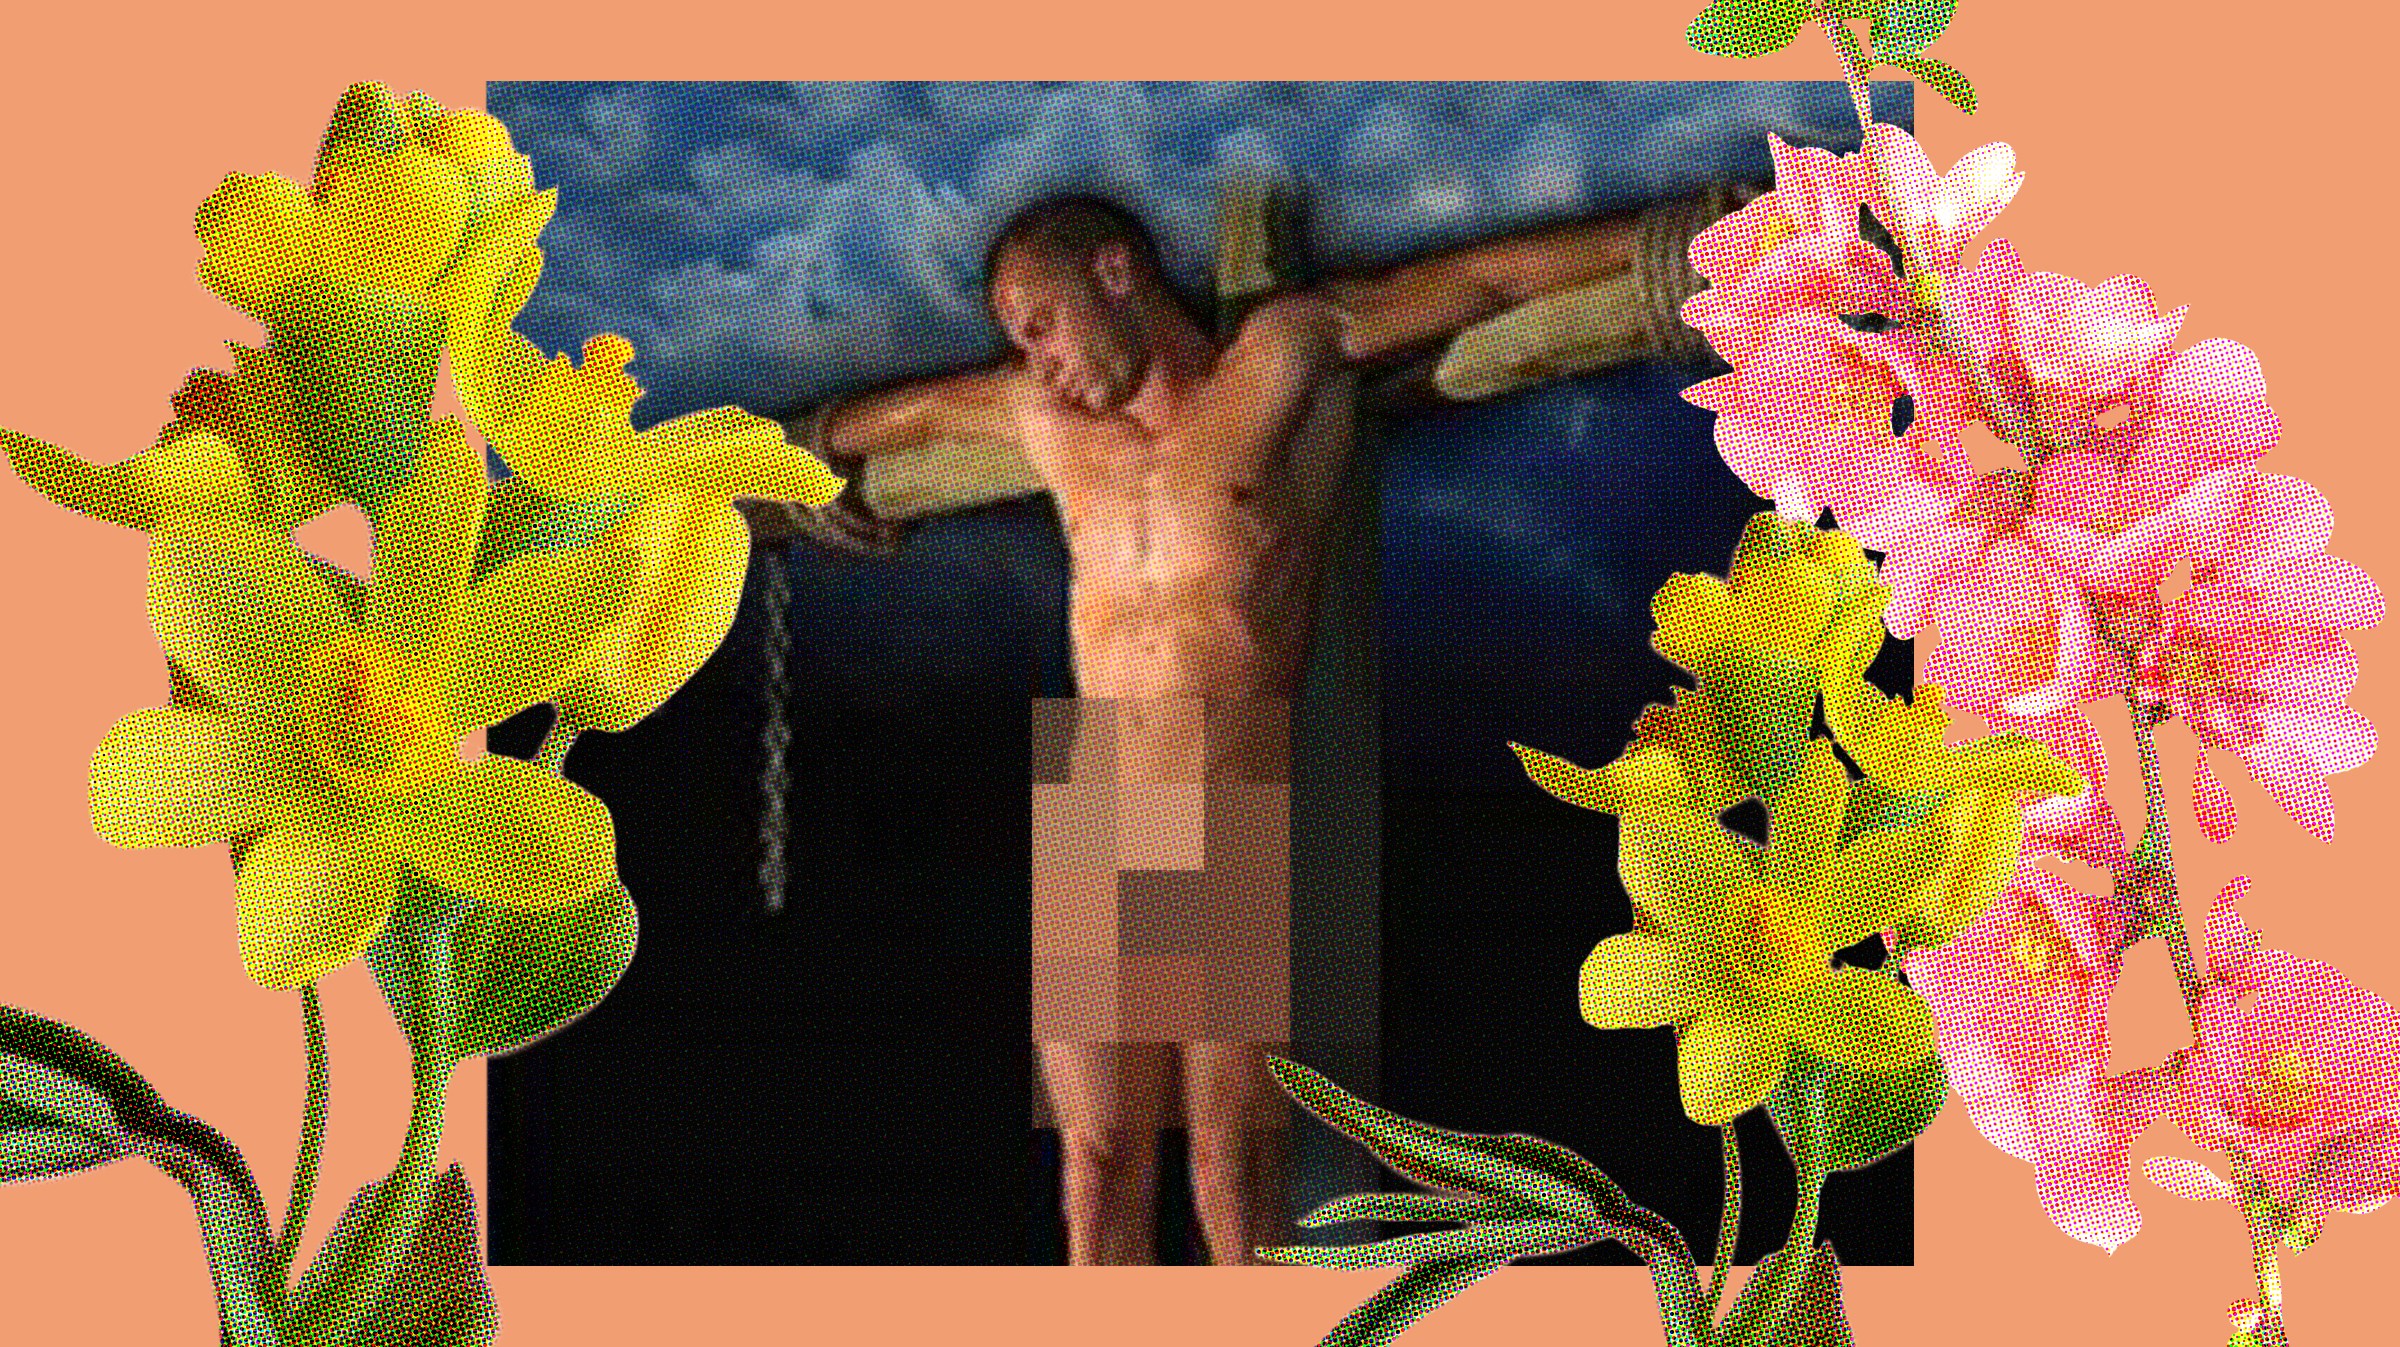 Jesus Naked Cartoon Xxx - The Incredible Story of 'Passio,' the Gay Porno Starring Jesus